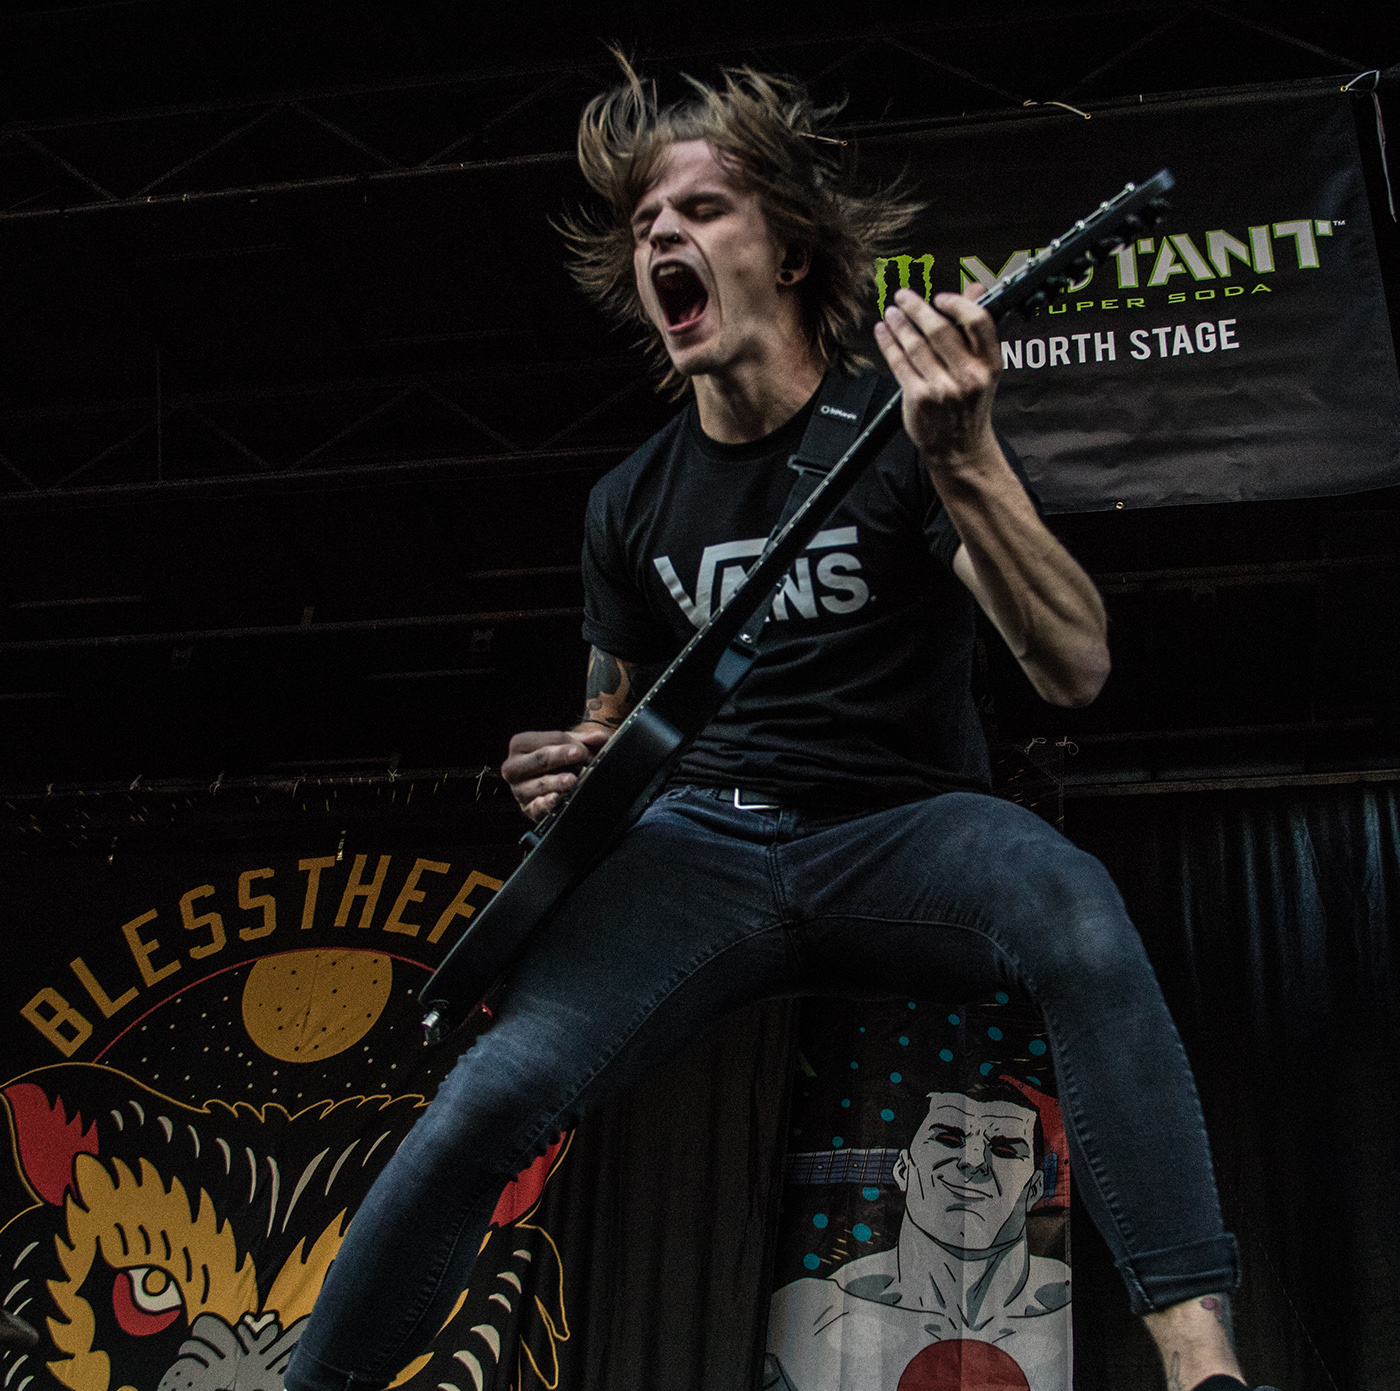 blessthefall band bands Singer seattle warpedtour press Photography  livemusic concert